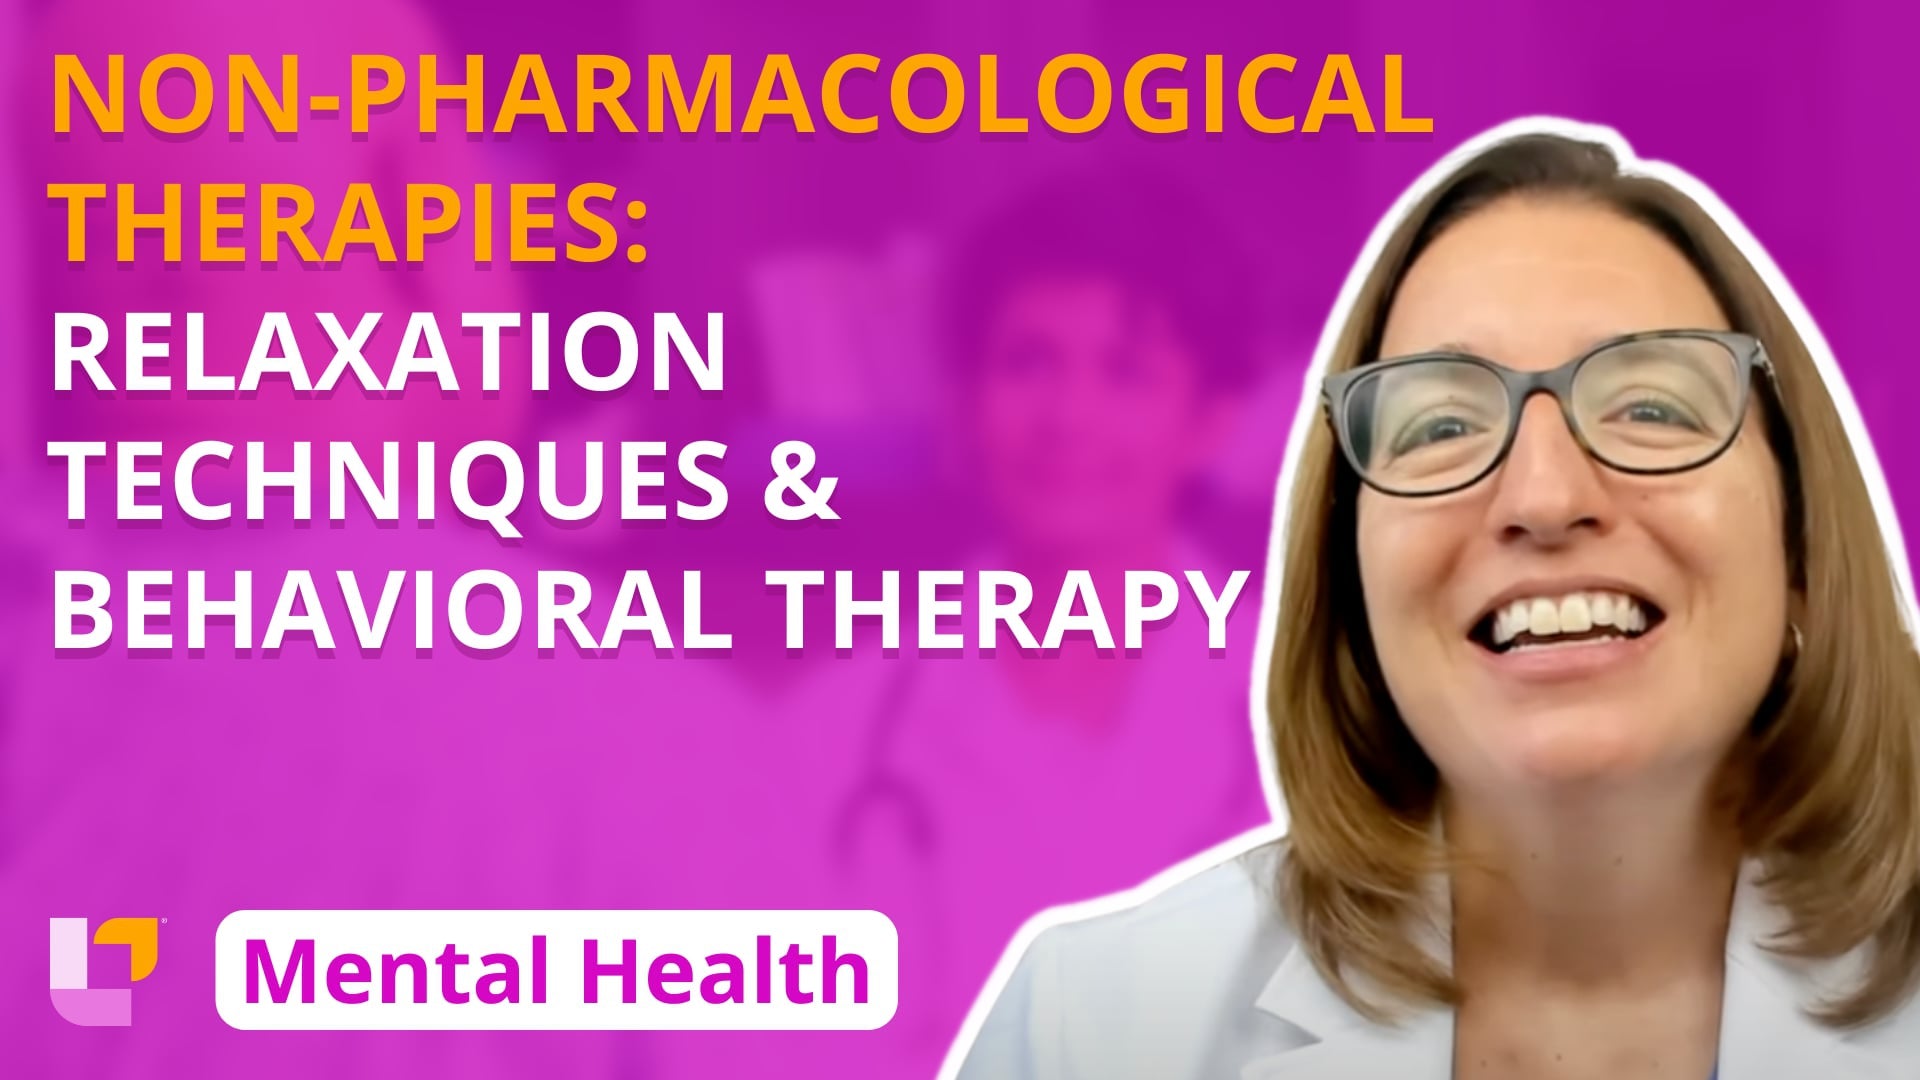 Psychiatric Mental Health - Therapies, part 1: Relaxation, Milieu, Group, and Behavioral - LevelUpRN